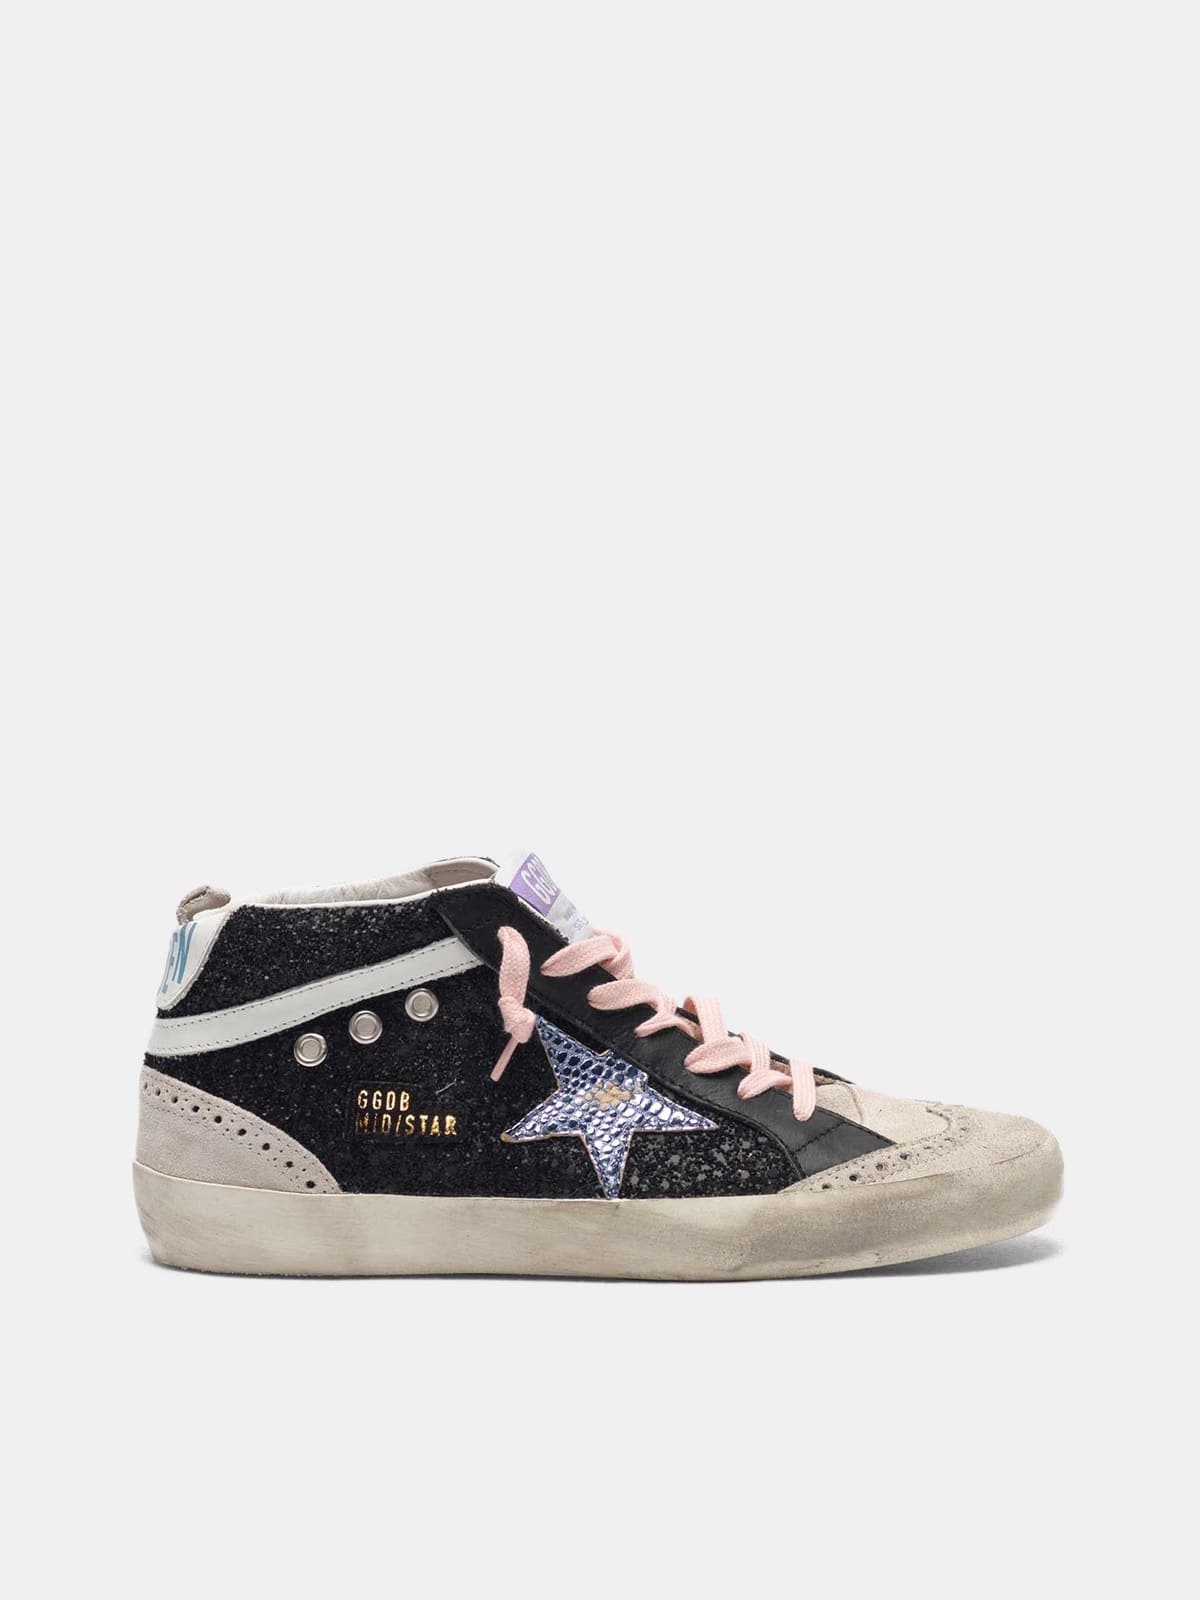 golden goose sneakers and glitter Black star Mid-Star with iridescent